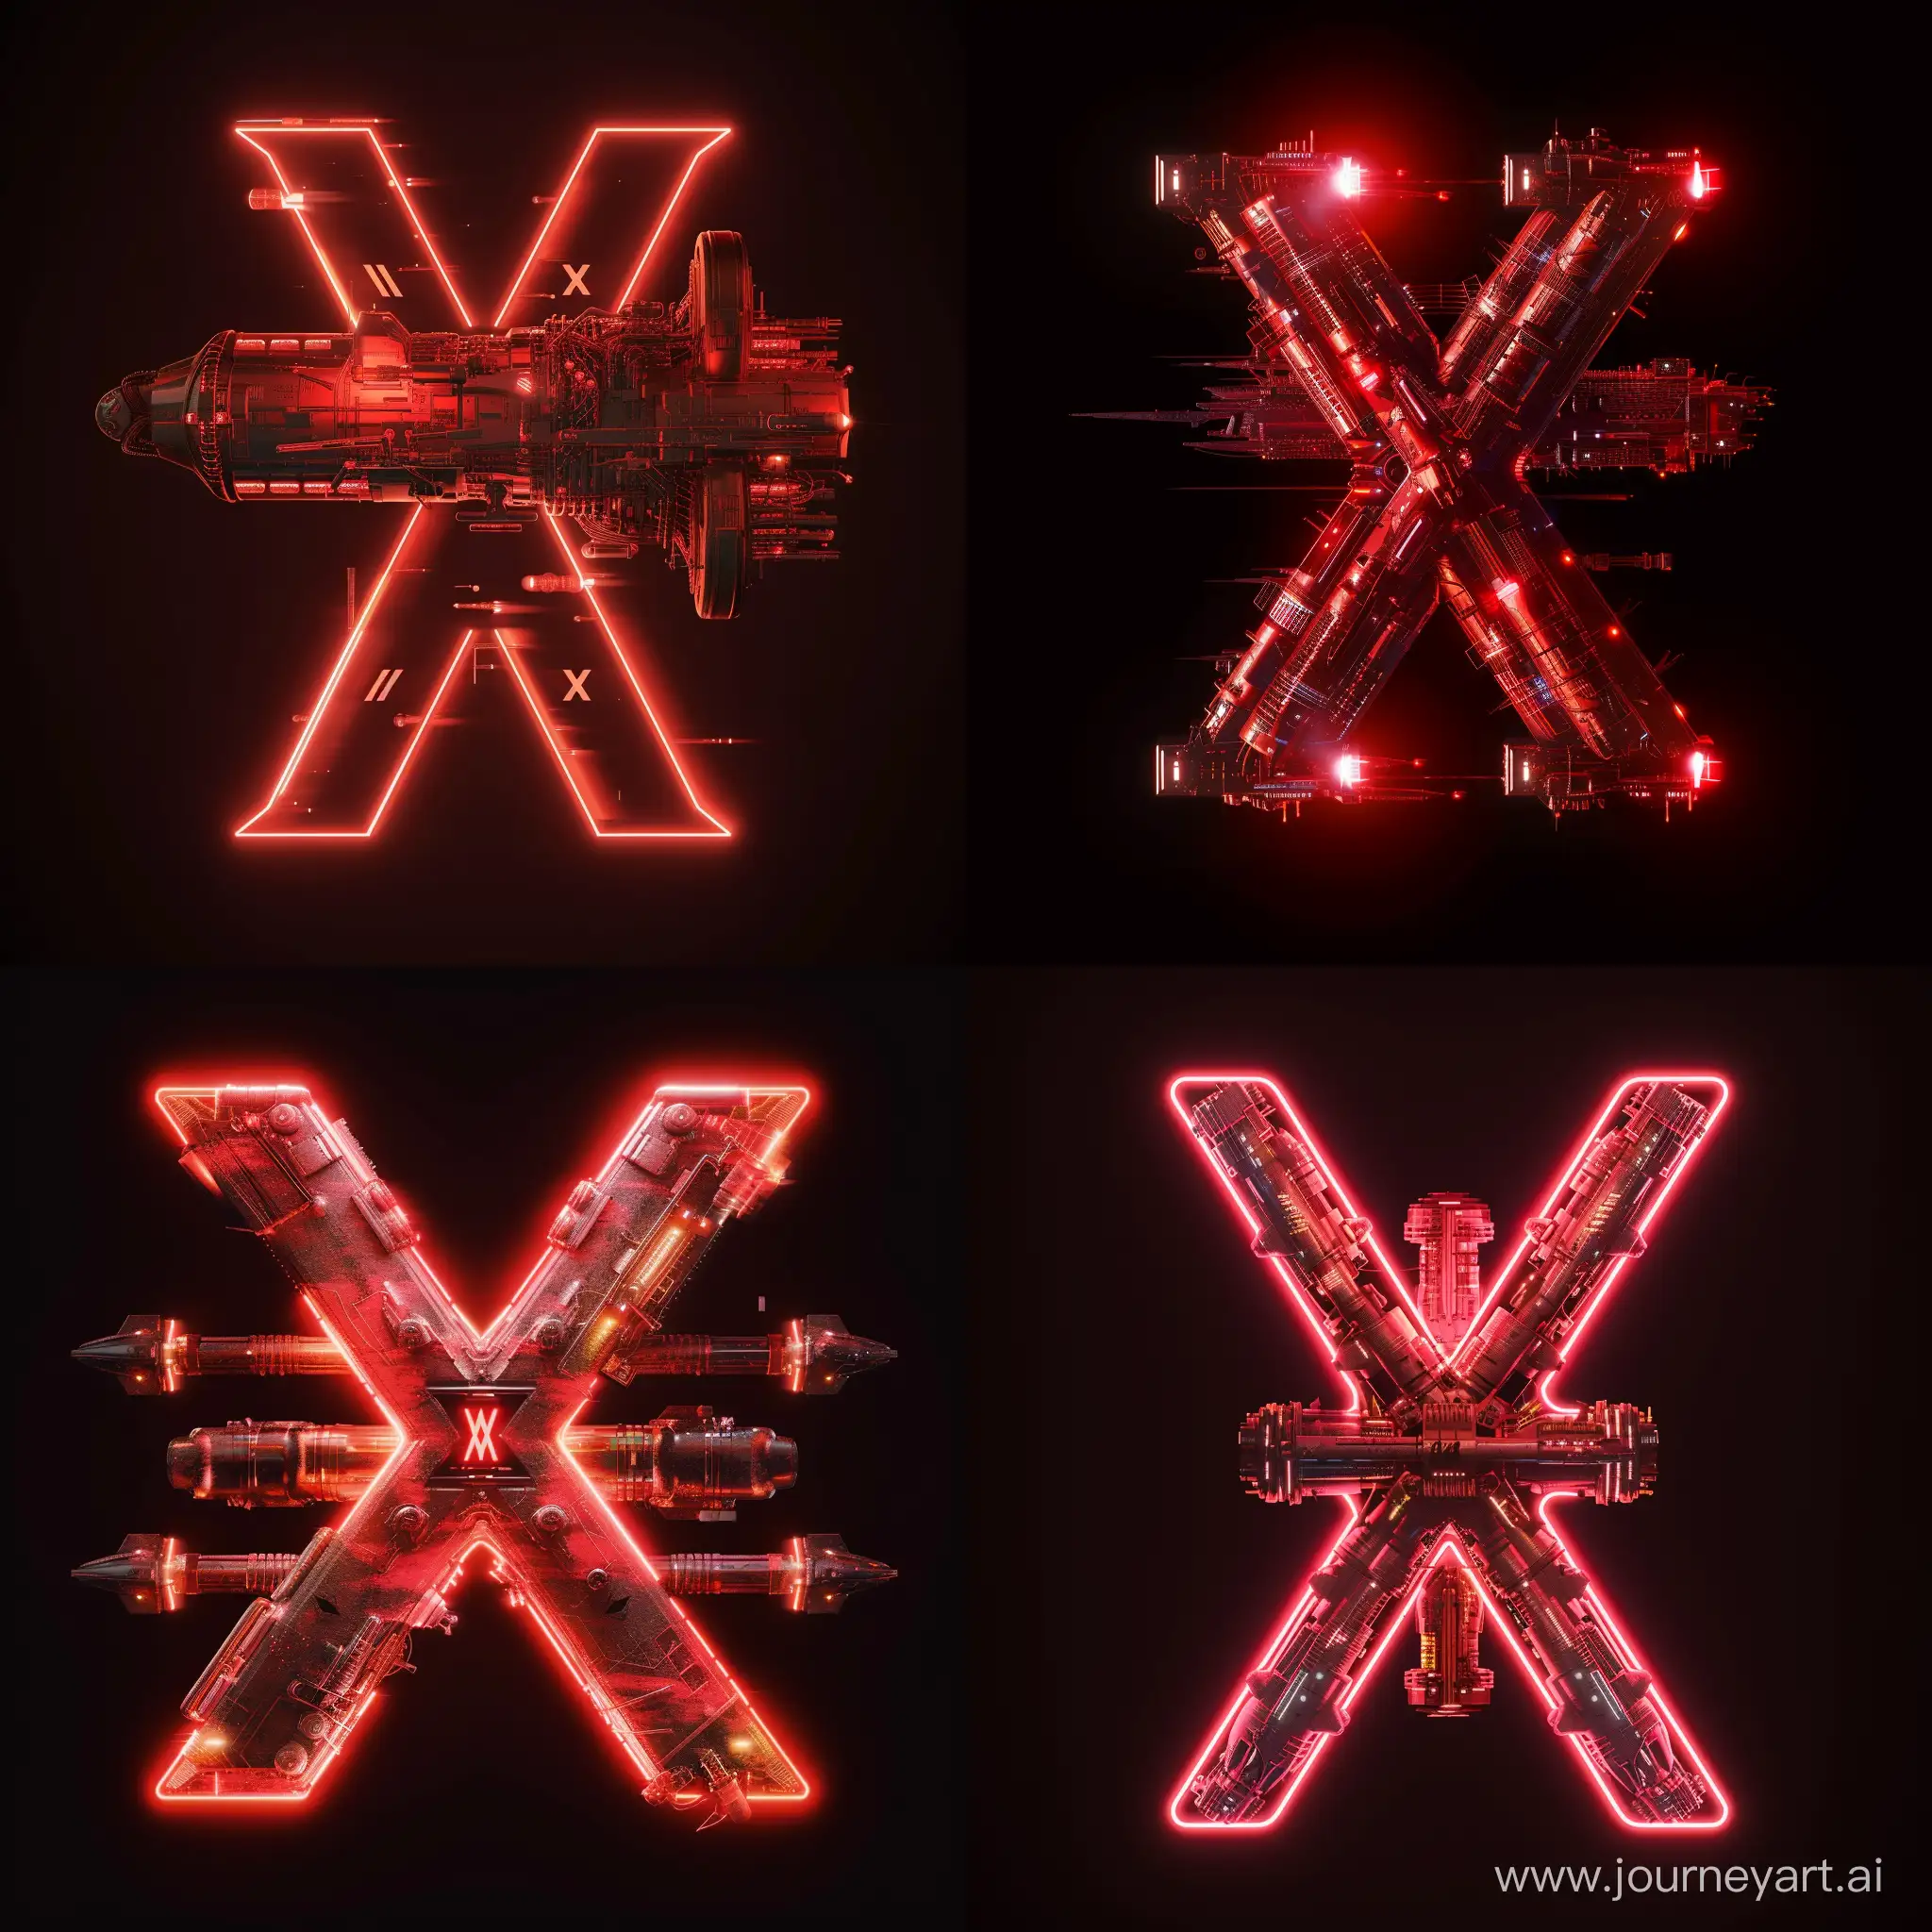 Futuristic-Ruby-Red-Letter-X-with-Glowing-Machinery-and-Starships